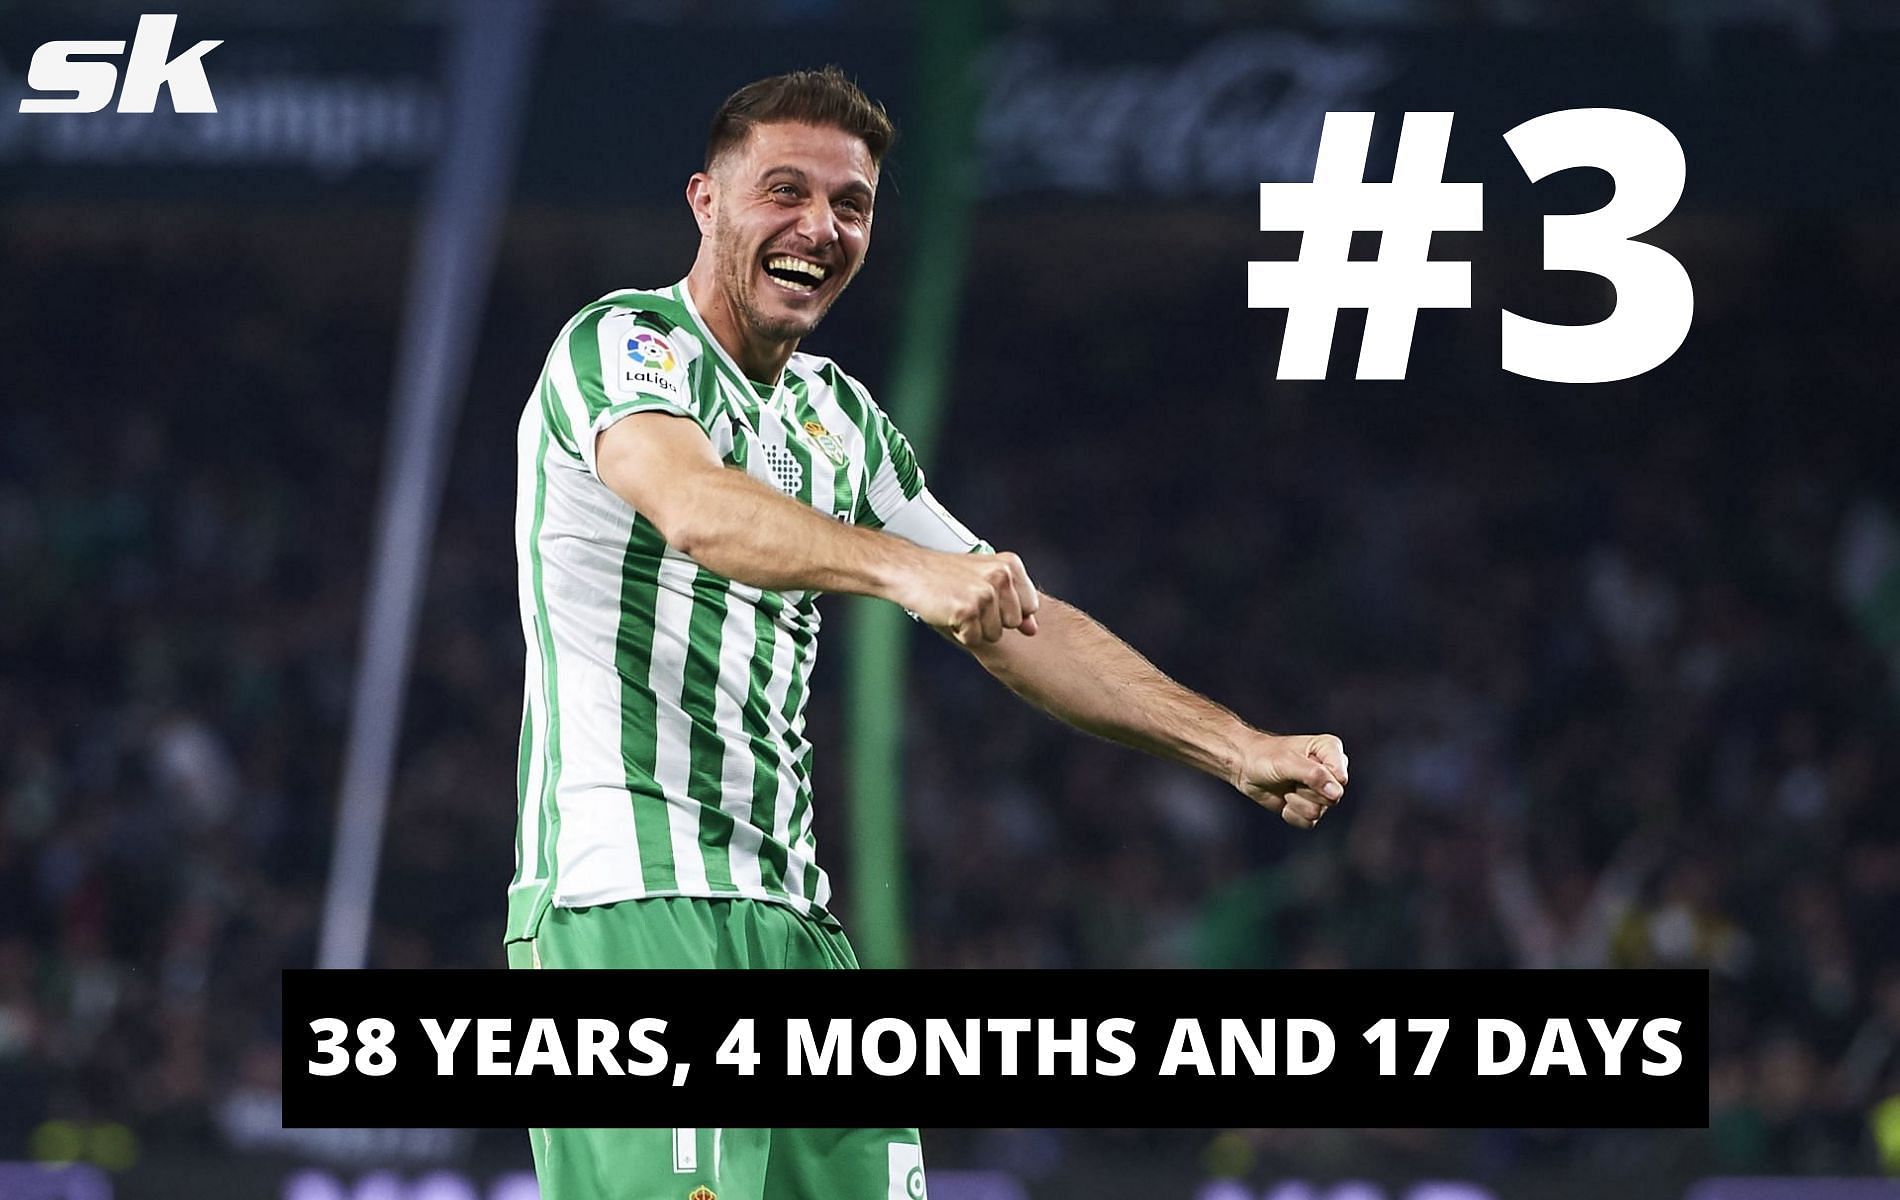 Real Betis legend Joaquin scored a hat-trick for the club aged 38 years old.